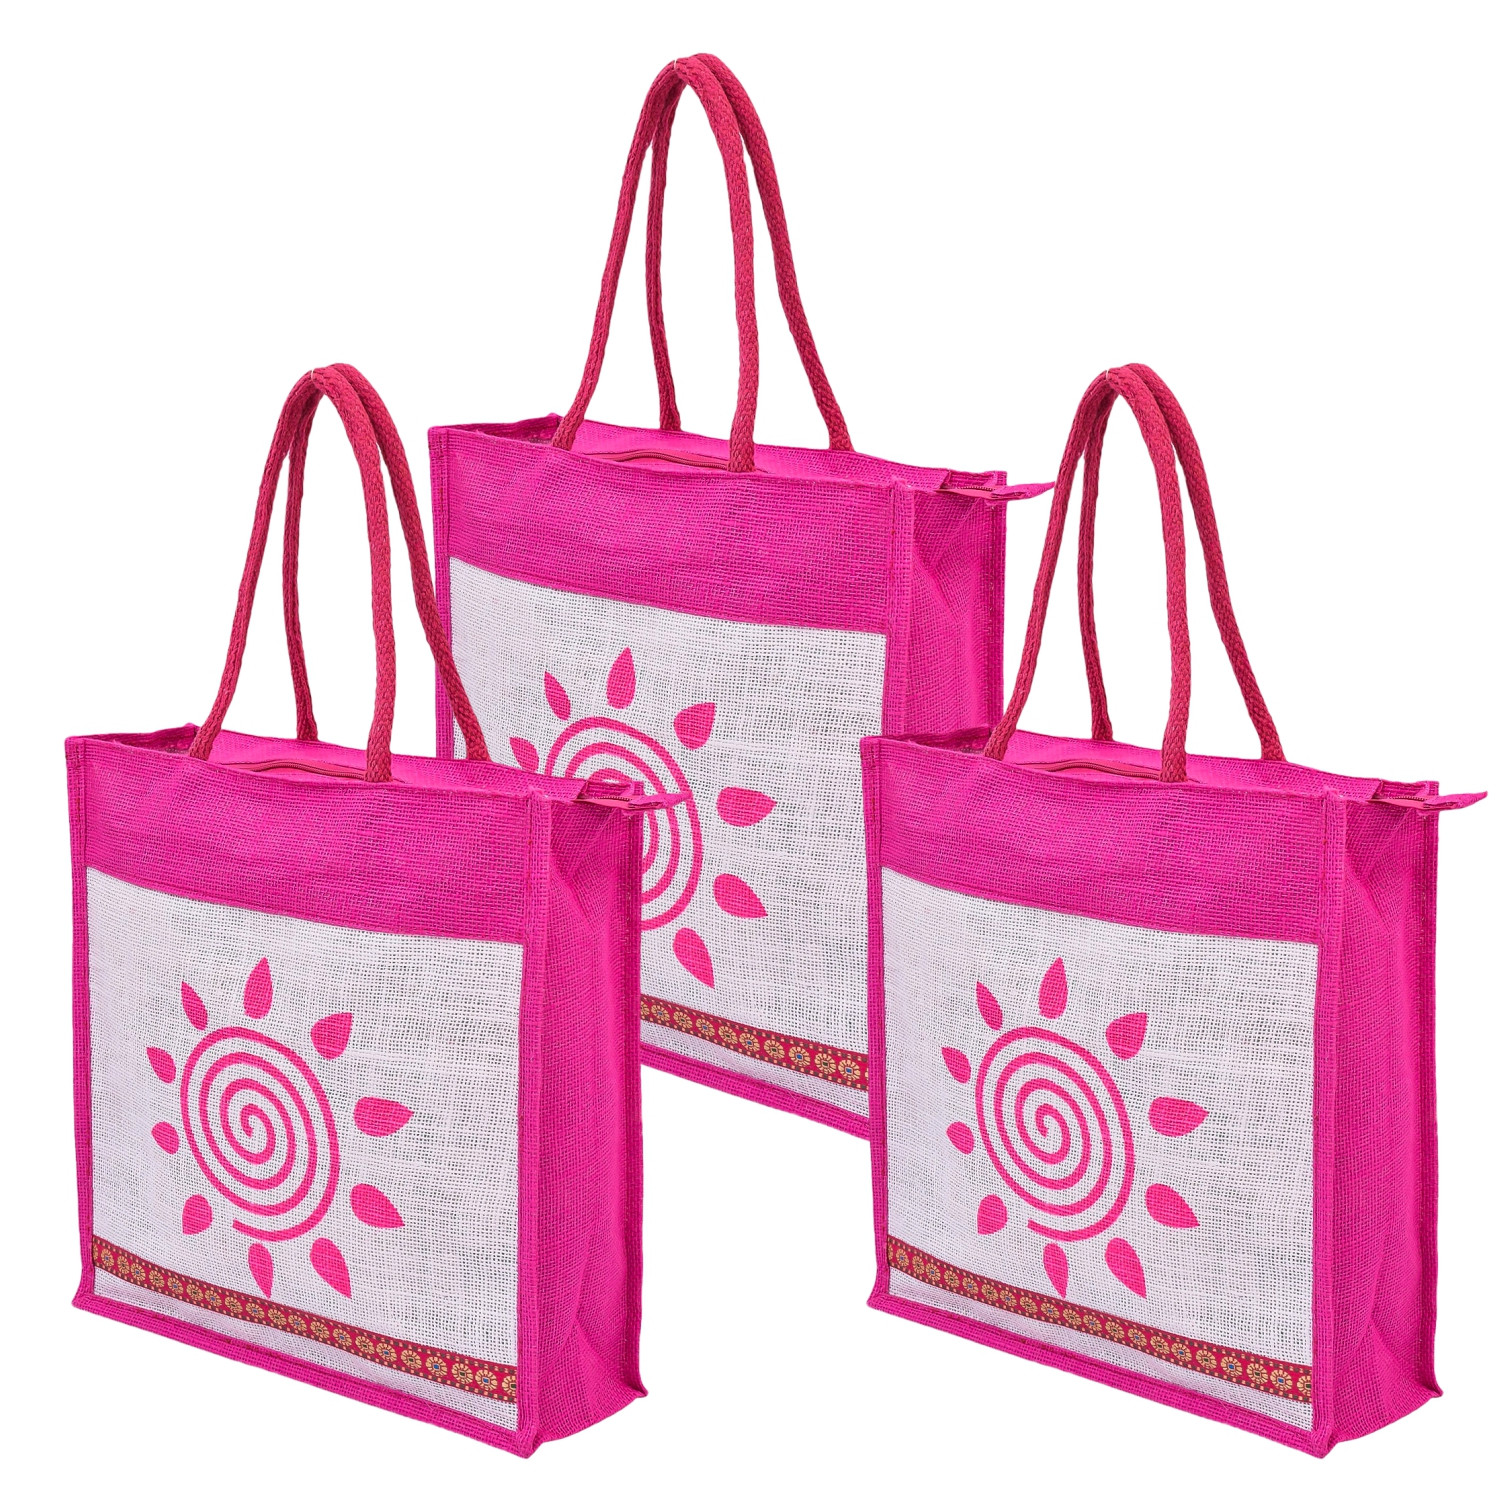 Kuber Industries Grocery Bag | Jute Carry Bag | Lunch Bags for Office | Zipper Grocery Bag with Handle | Vegetable Bag | Pink Sunflower Shopping Bag | Medium | Cream